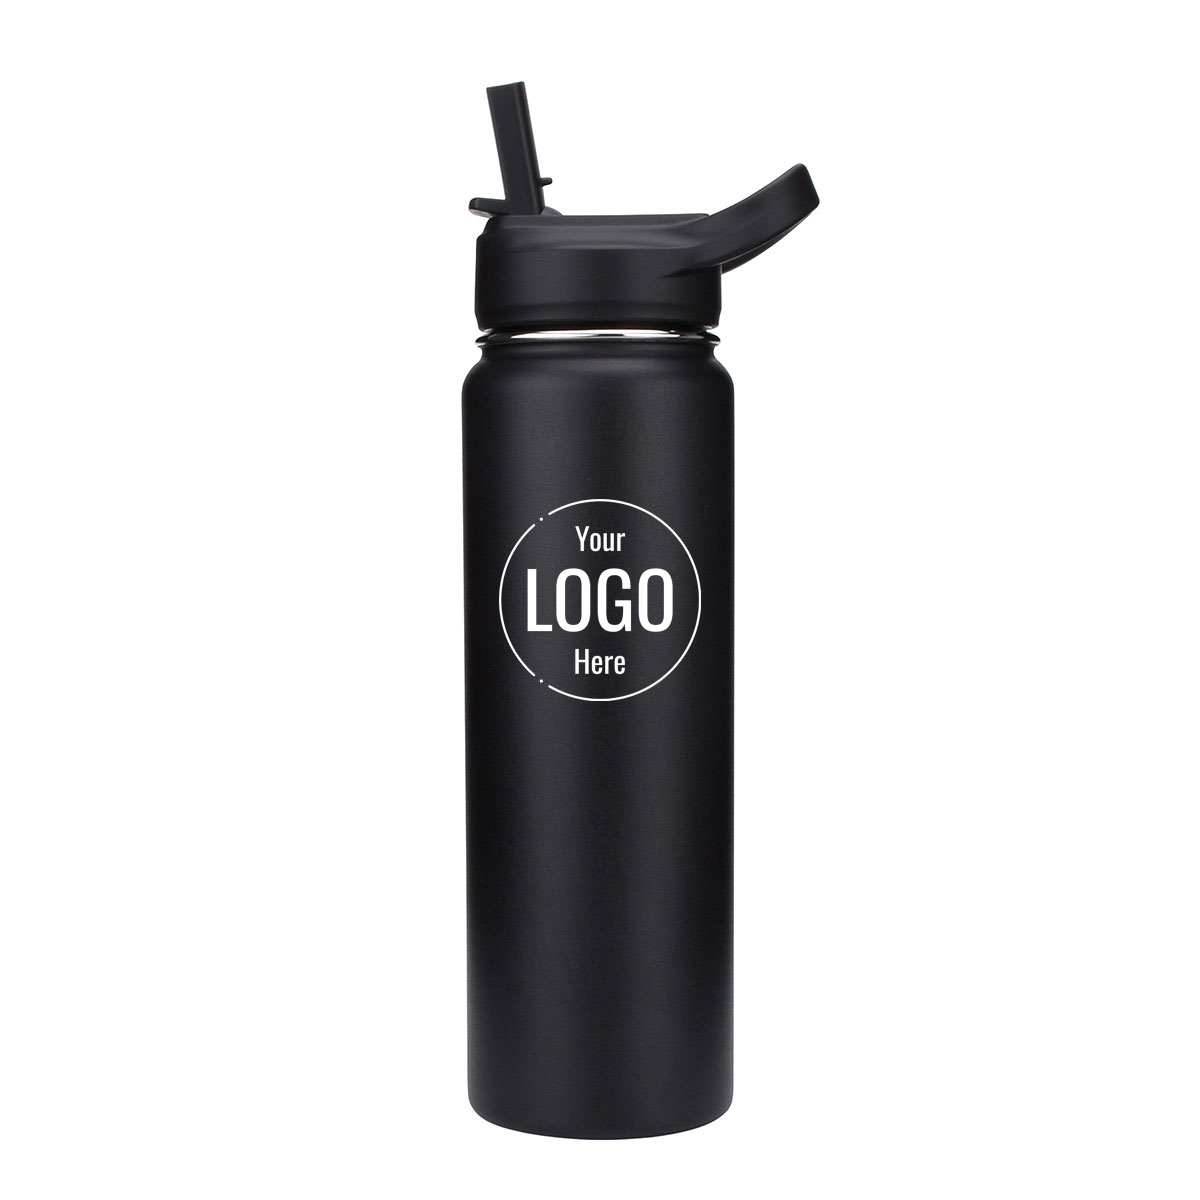 https://www.bulkflask.com/wp-content/uploads/2022/07/insulated-wide-mouth-water-bottle-with-straw-lid-24oz-blank-black-1.jpg